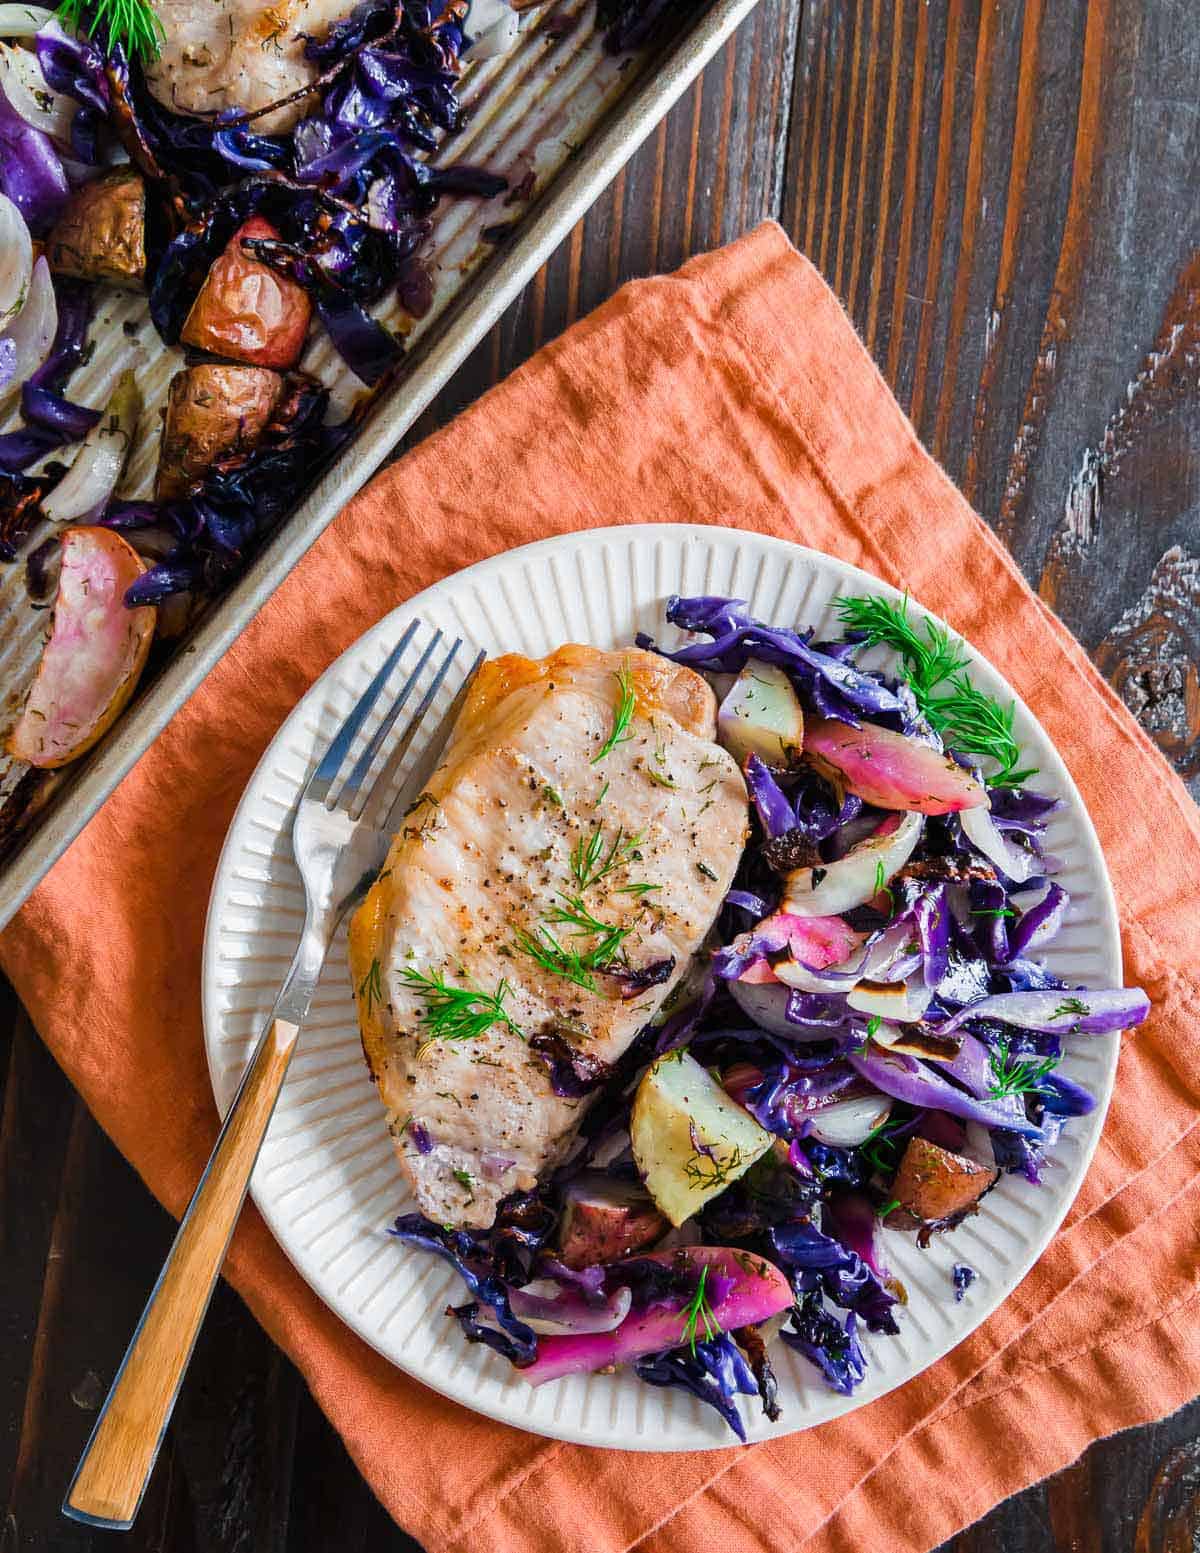 Juicy pork chops served with roasted potatoes, cabbage and apples is an easy and quick sheet pan meal.